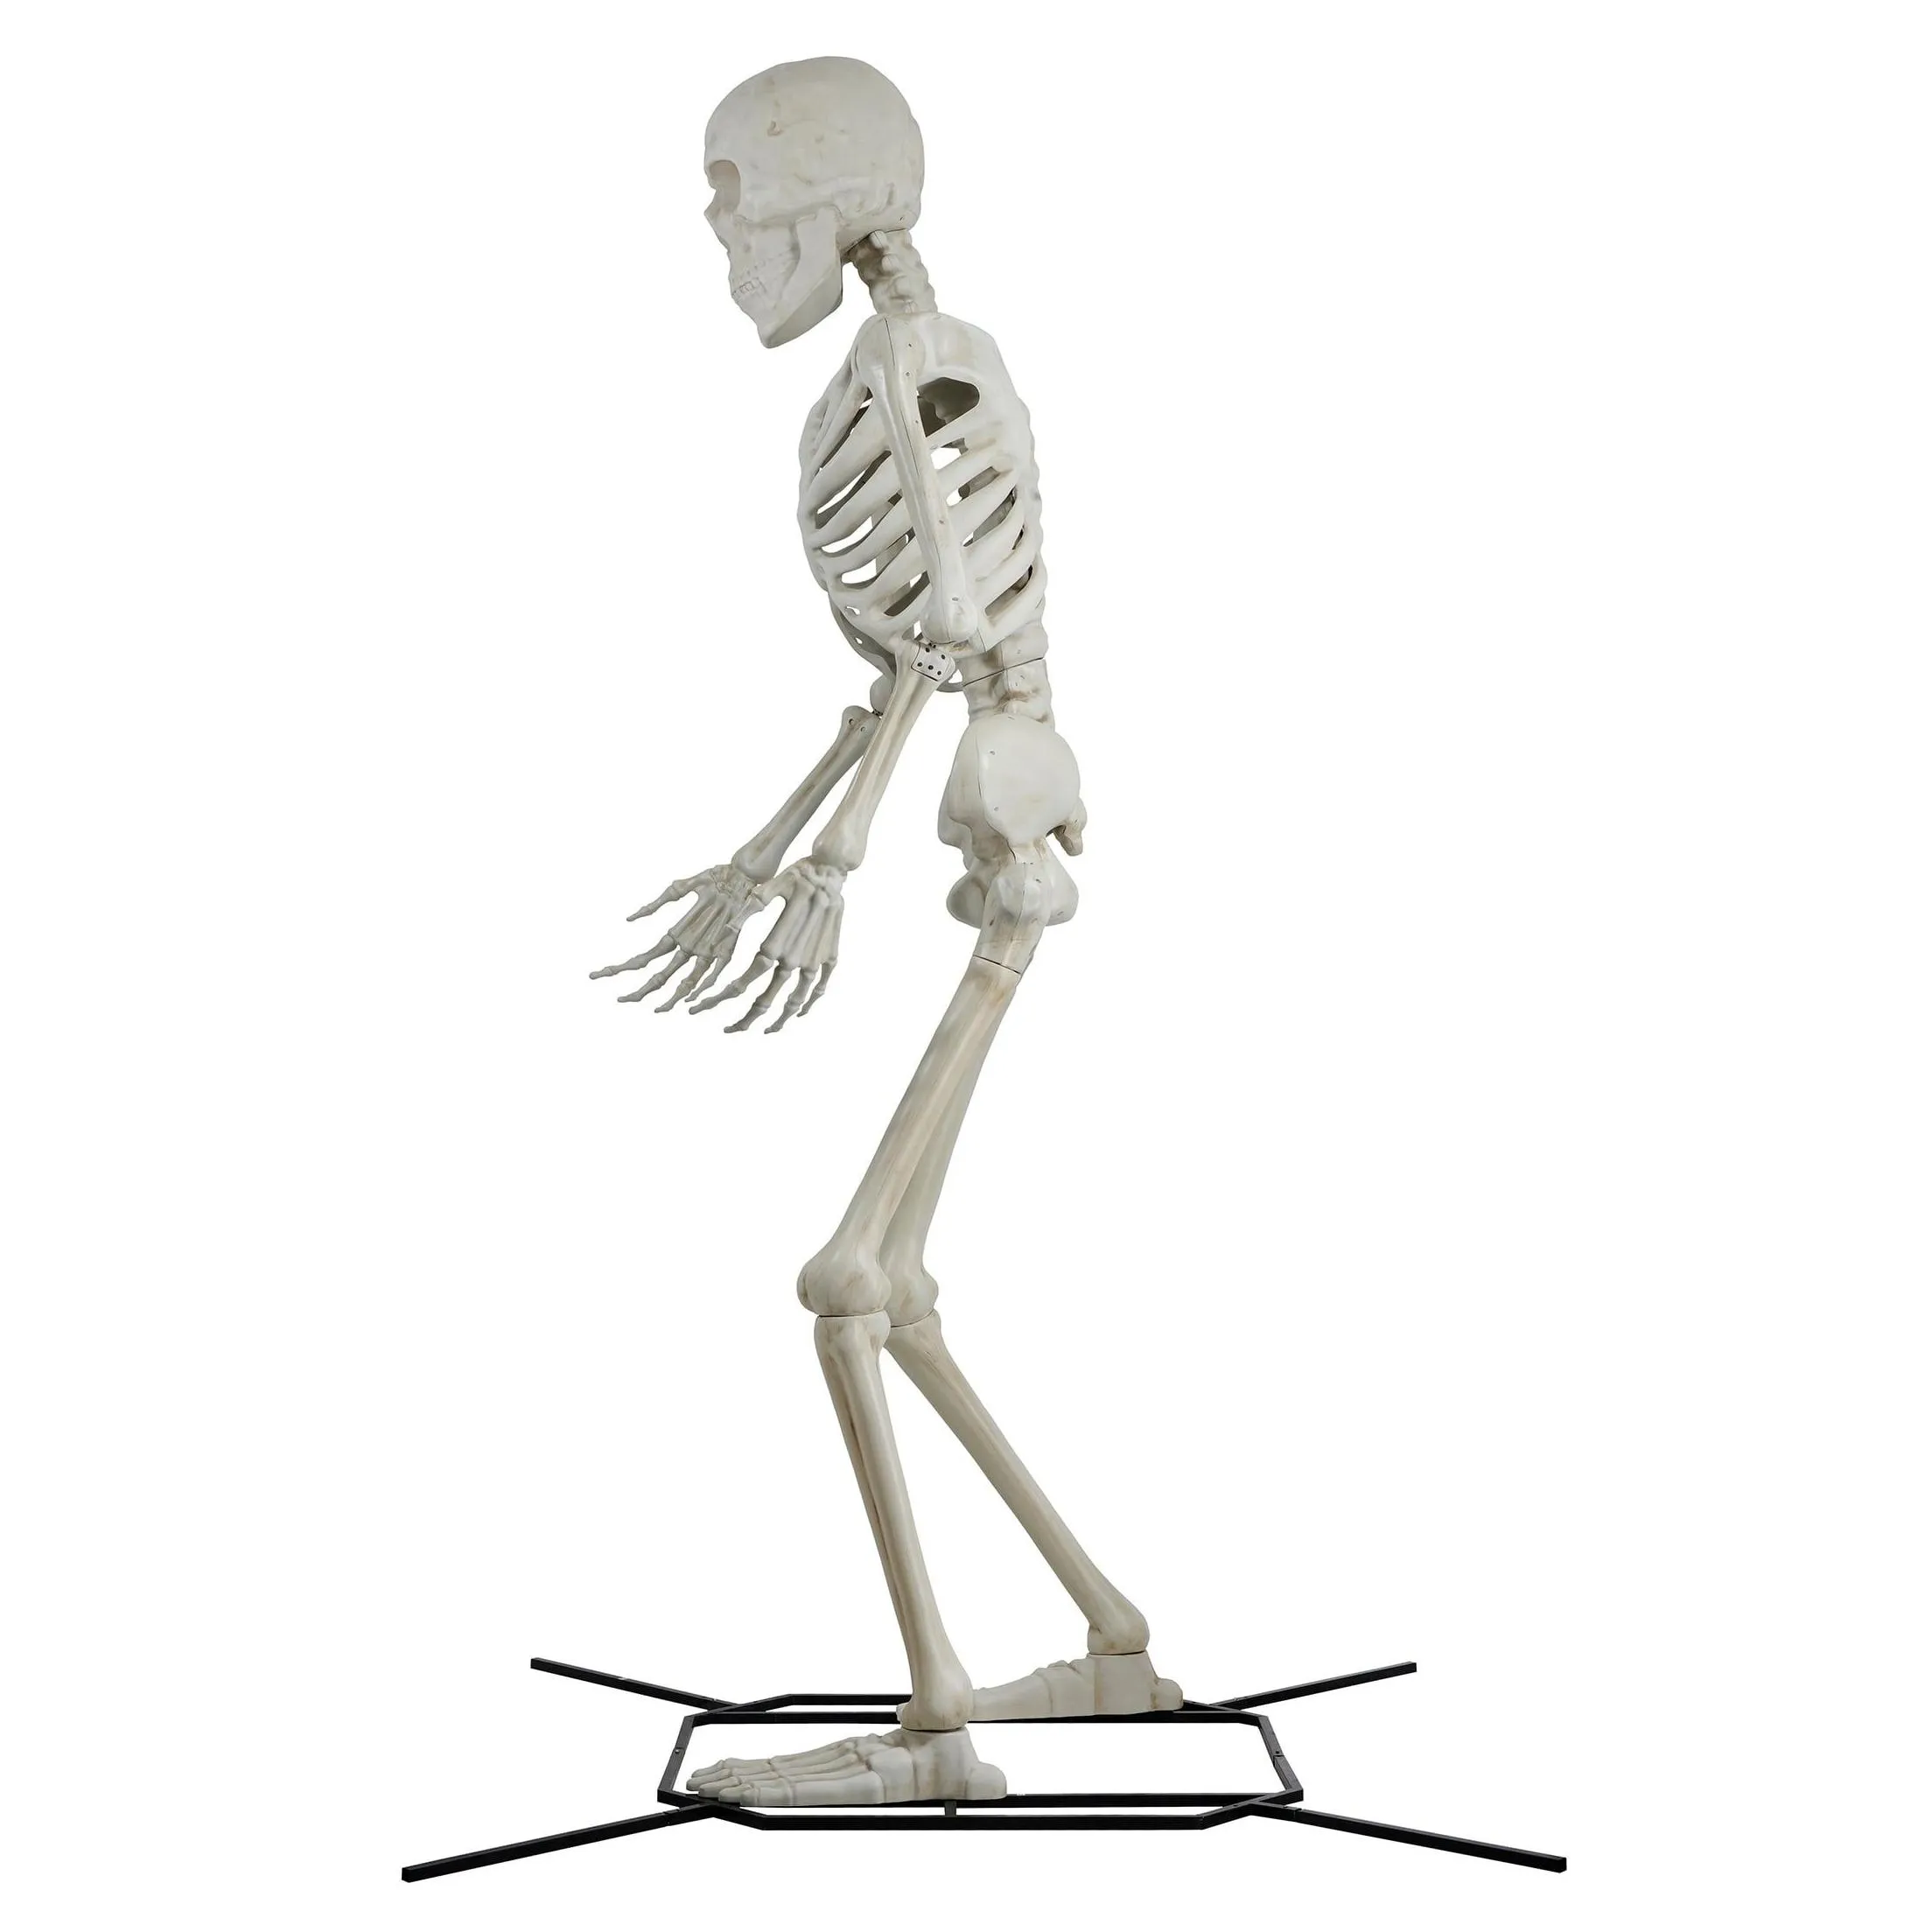 Arts And Crafts Halloween Nt Poseable Skeleton Decoration Bone Color 10 Ft By Way To Celebrate Drop Delivery Home Garden Gifts Ot5Xe